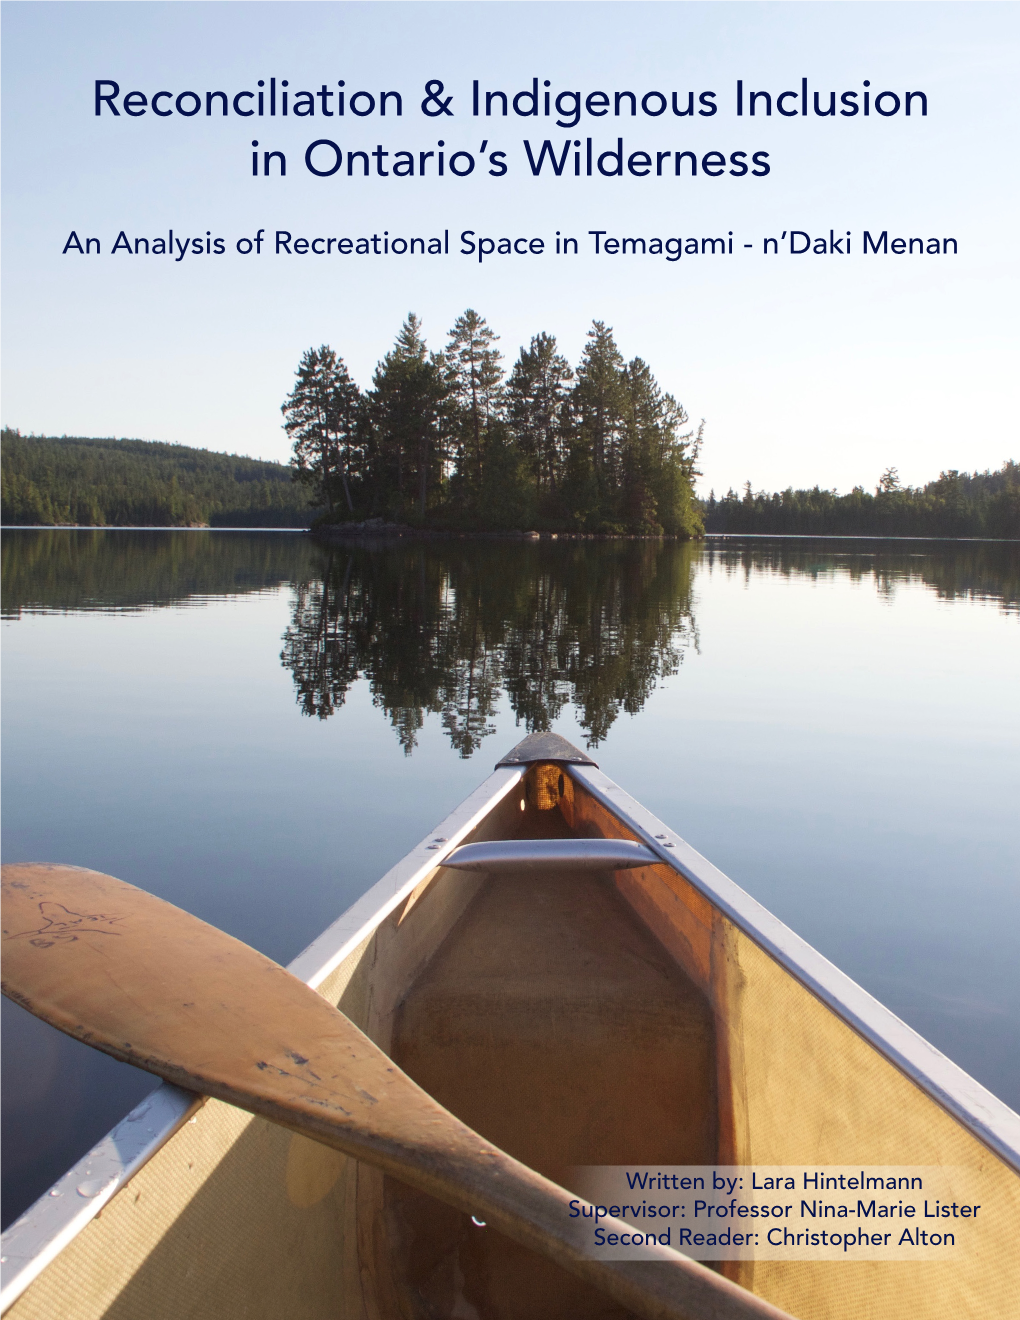 Reconciliation & Indigenous Inclusion in Ontario's Wilderness